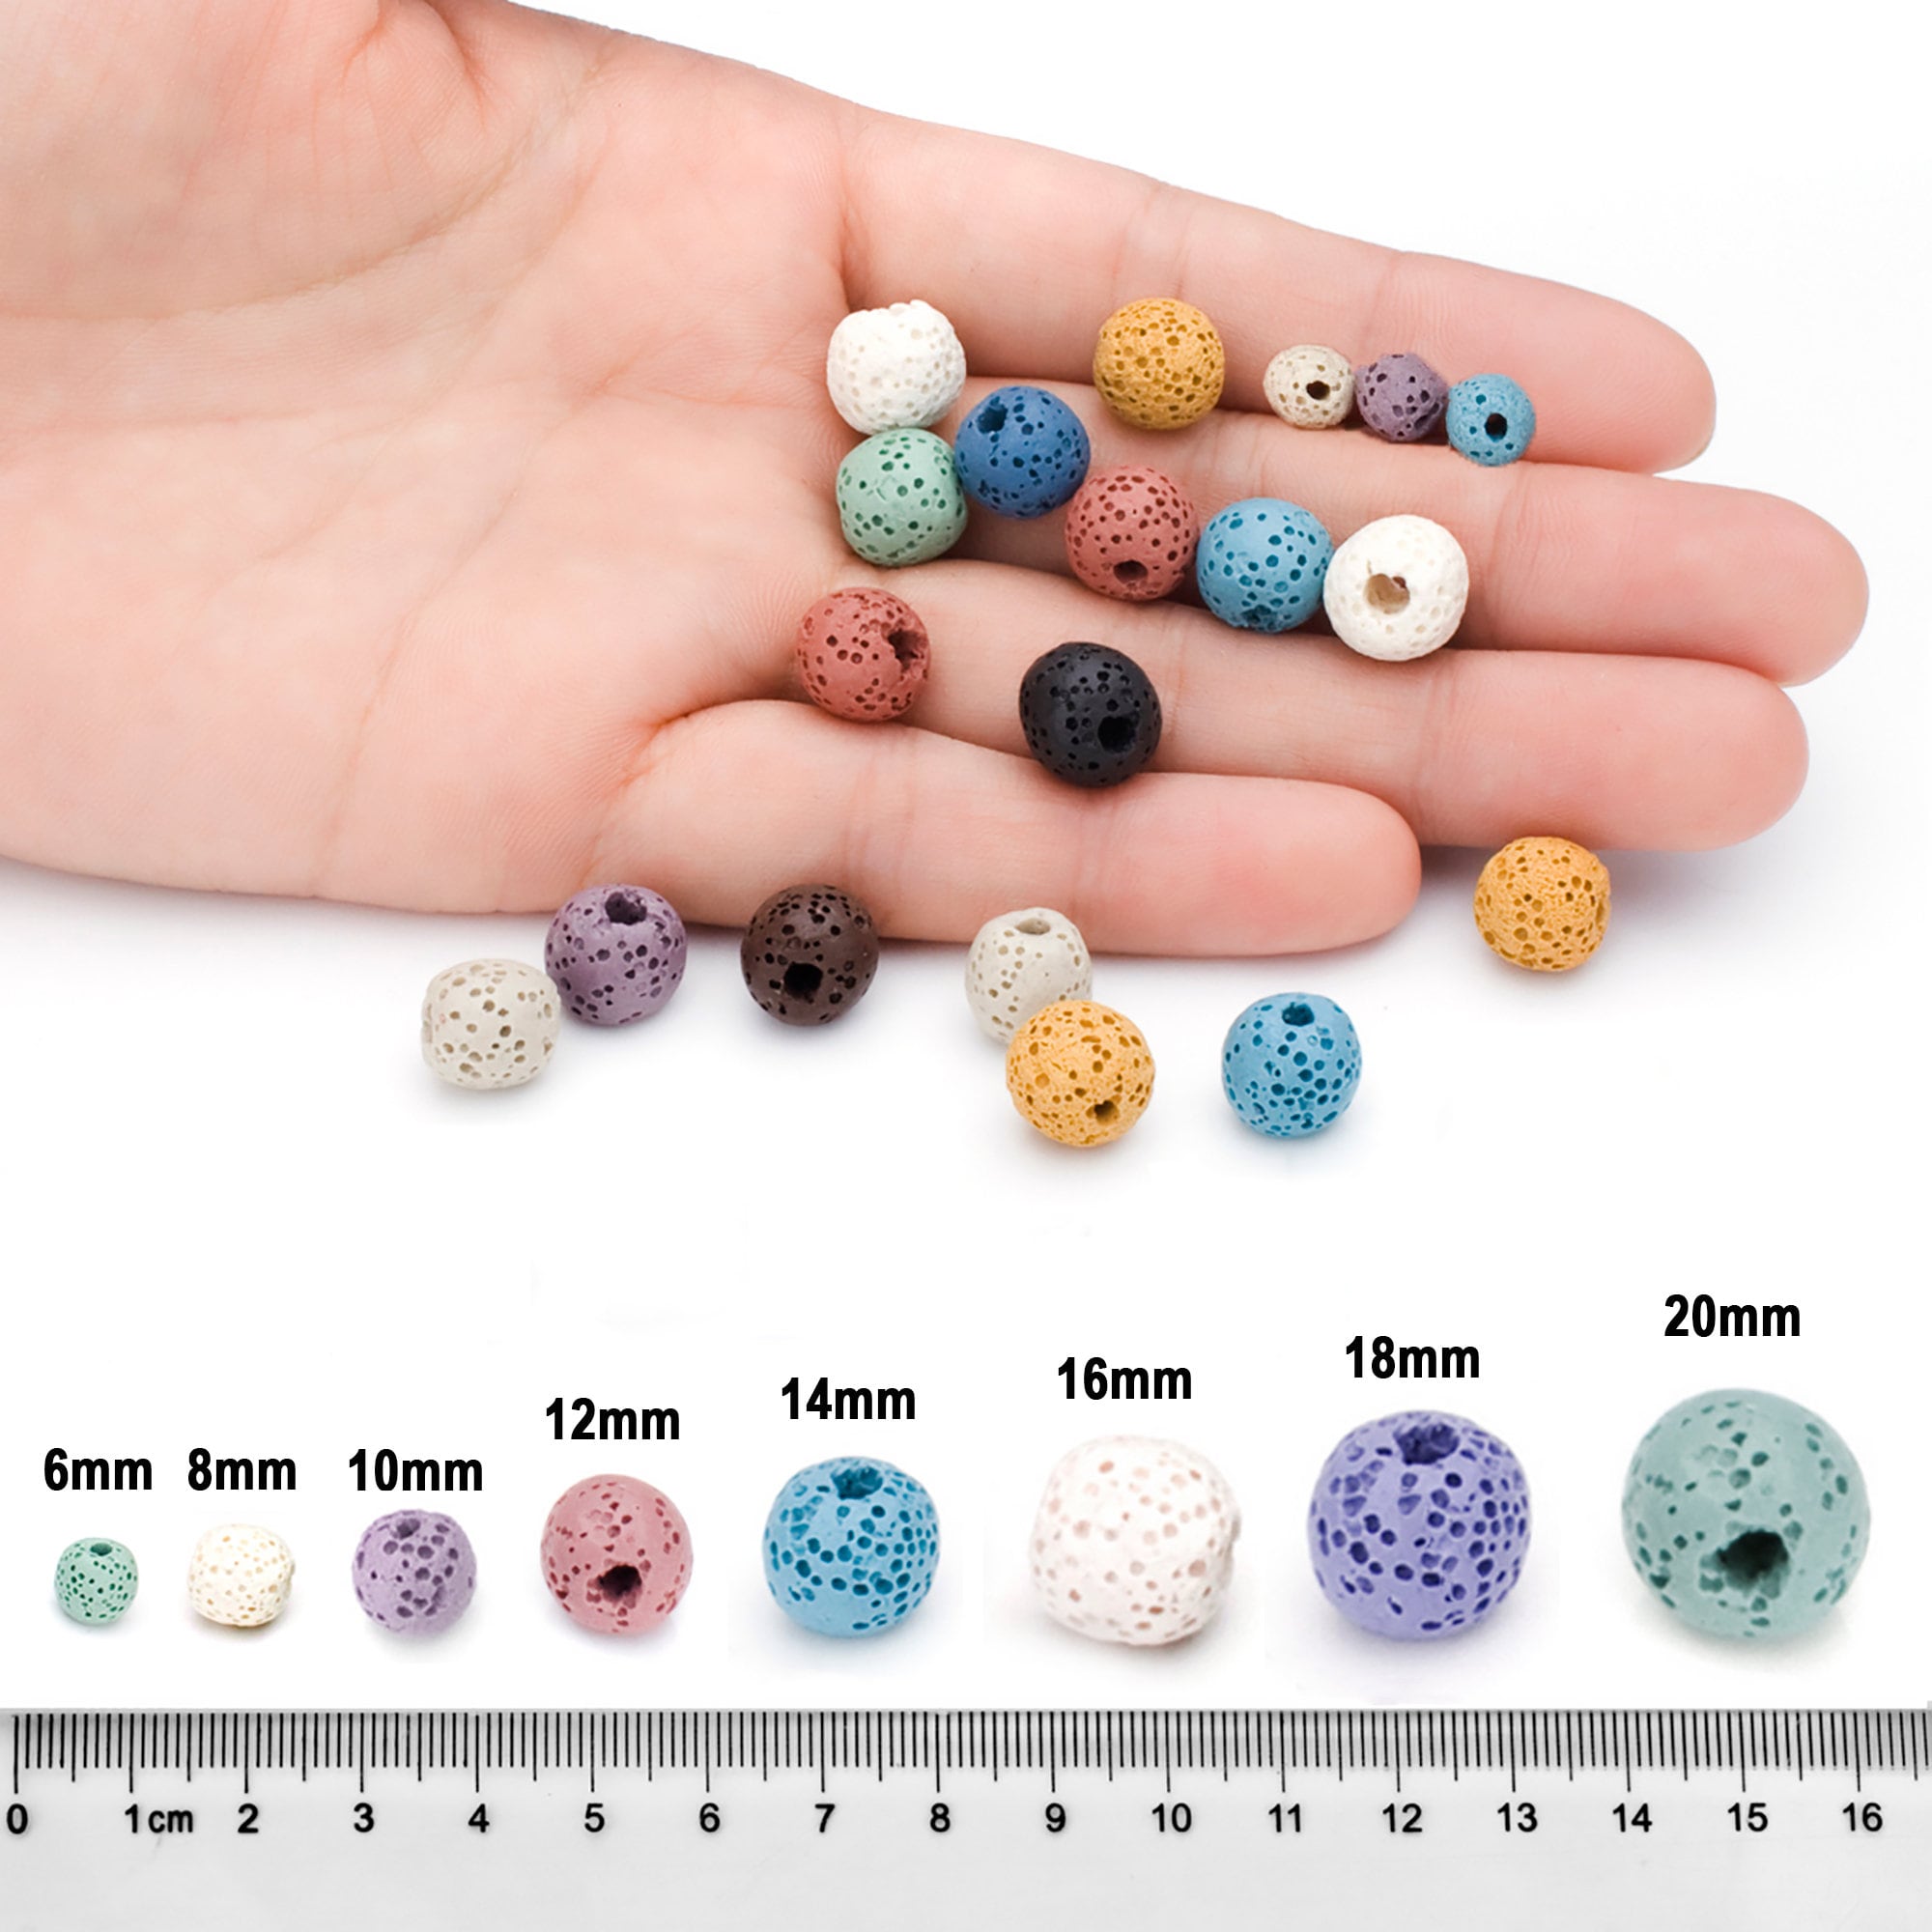 BEADNOVA 10mm Color Lava Beads Natural Crystal Beads Stone Gemstone Round  Loose Energy Healing Beads for Jewelry Making (10mm, 32-34pcs, Mix Color)